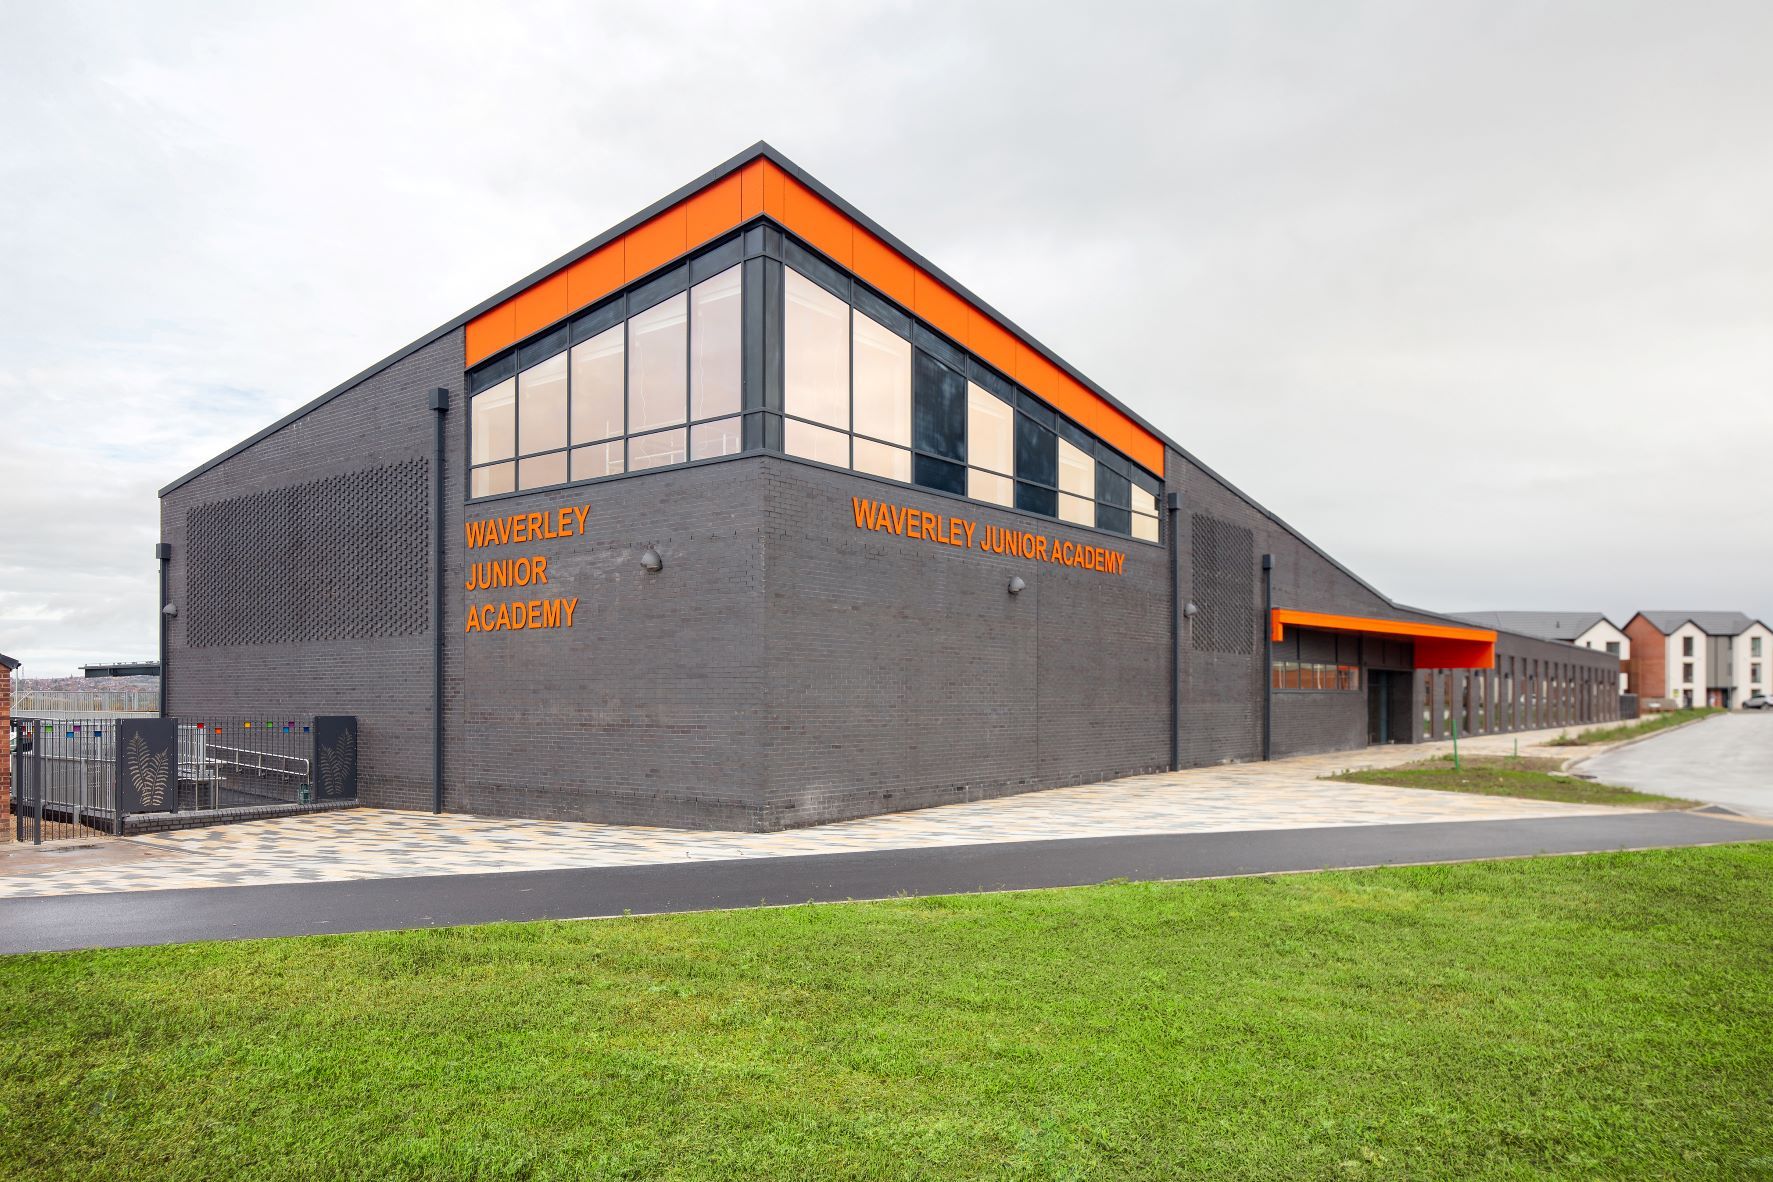 Outside view of Waverley Junior Academy, where our commerical engineers provided Mechanical & Electrical Installations.